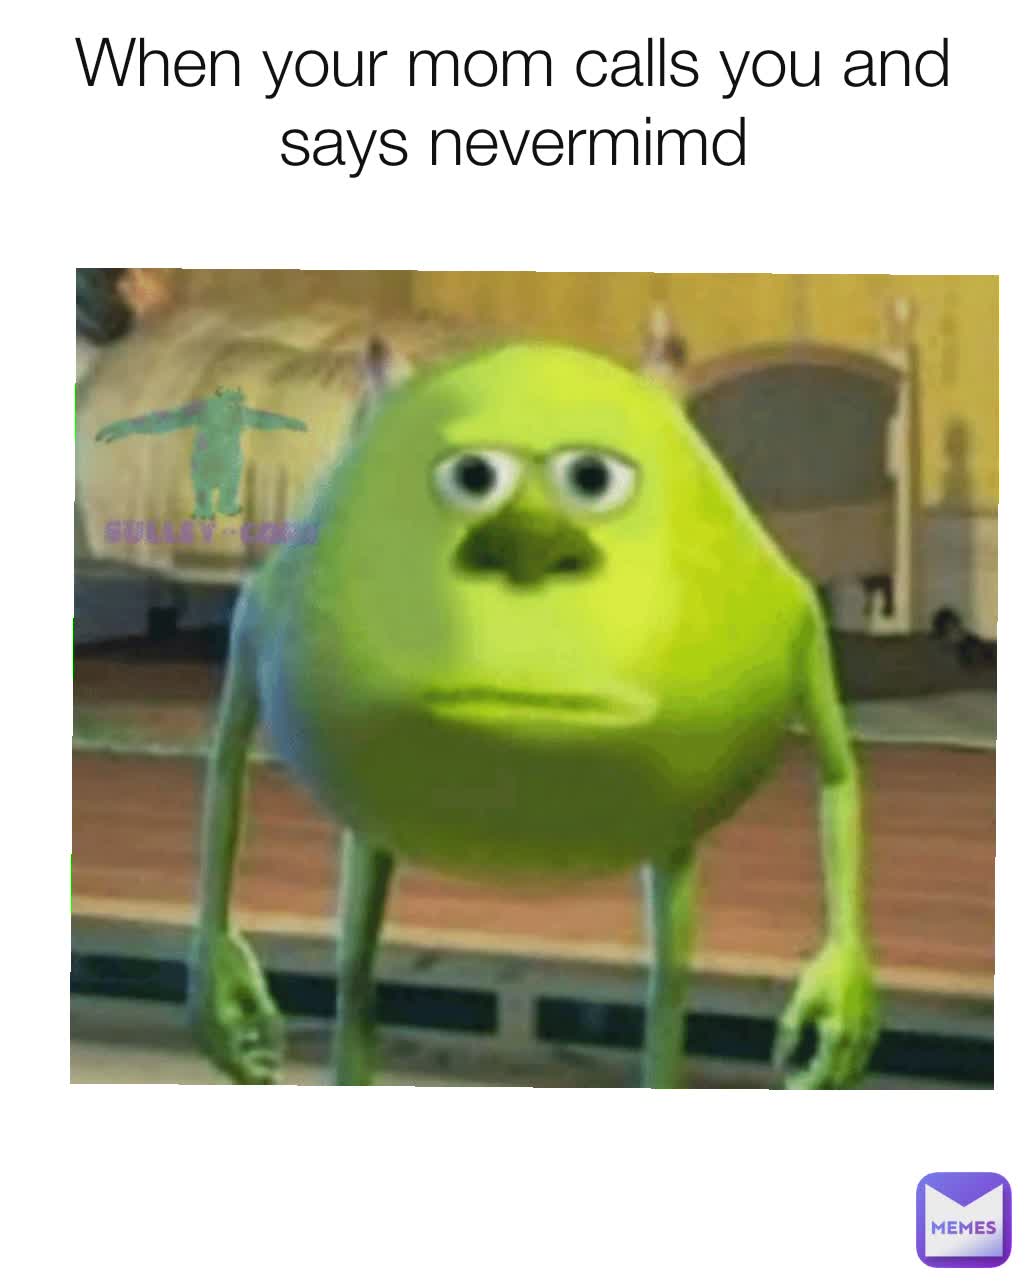 When your mom calls you and says nevermimd
